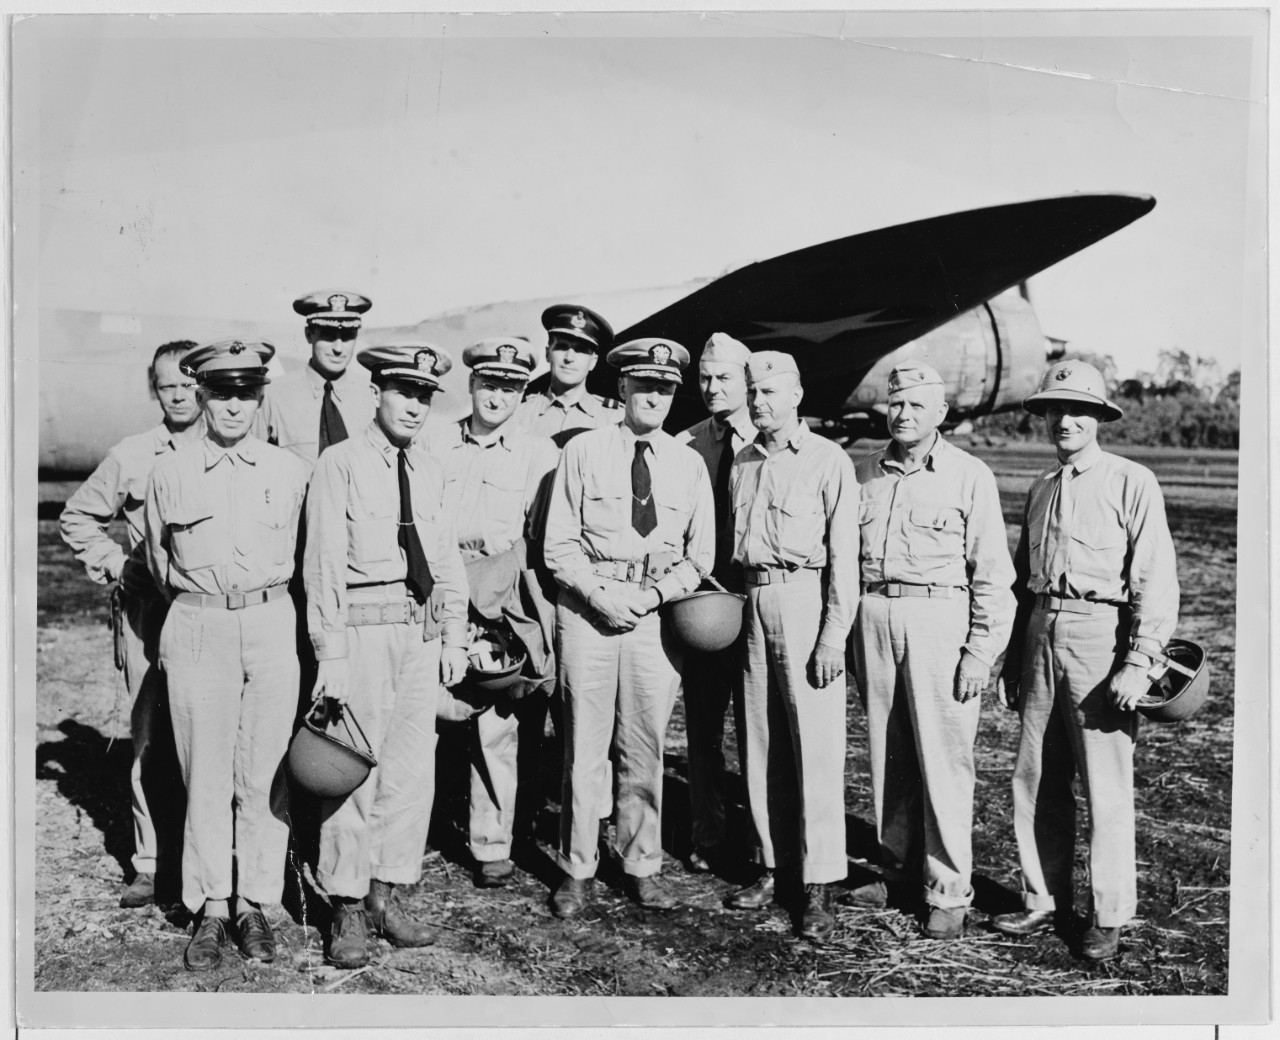 Admiral Nimitz, CINCPAC, is Shown with Some of his Staff Officers and others at Guadalcanal Airfield